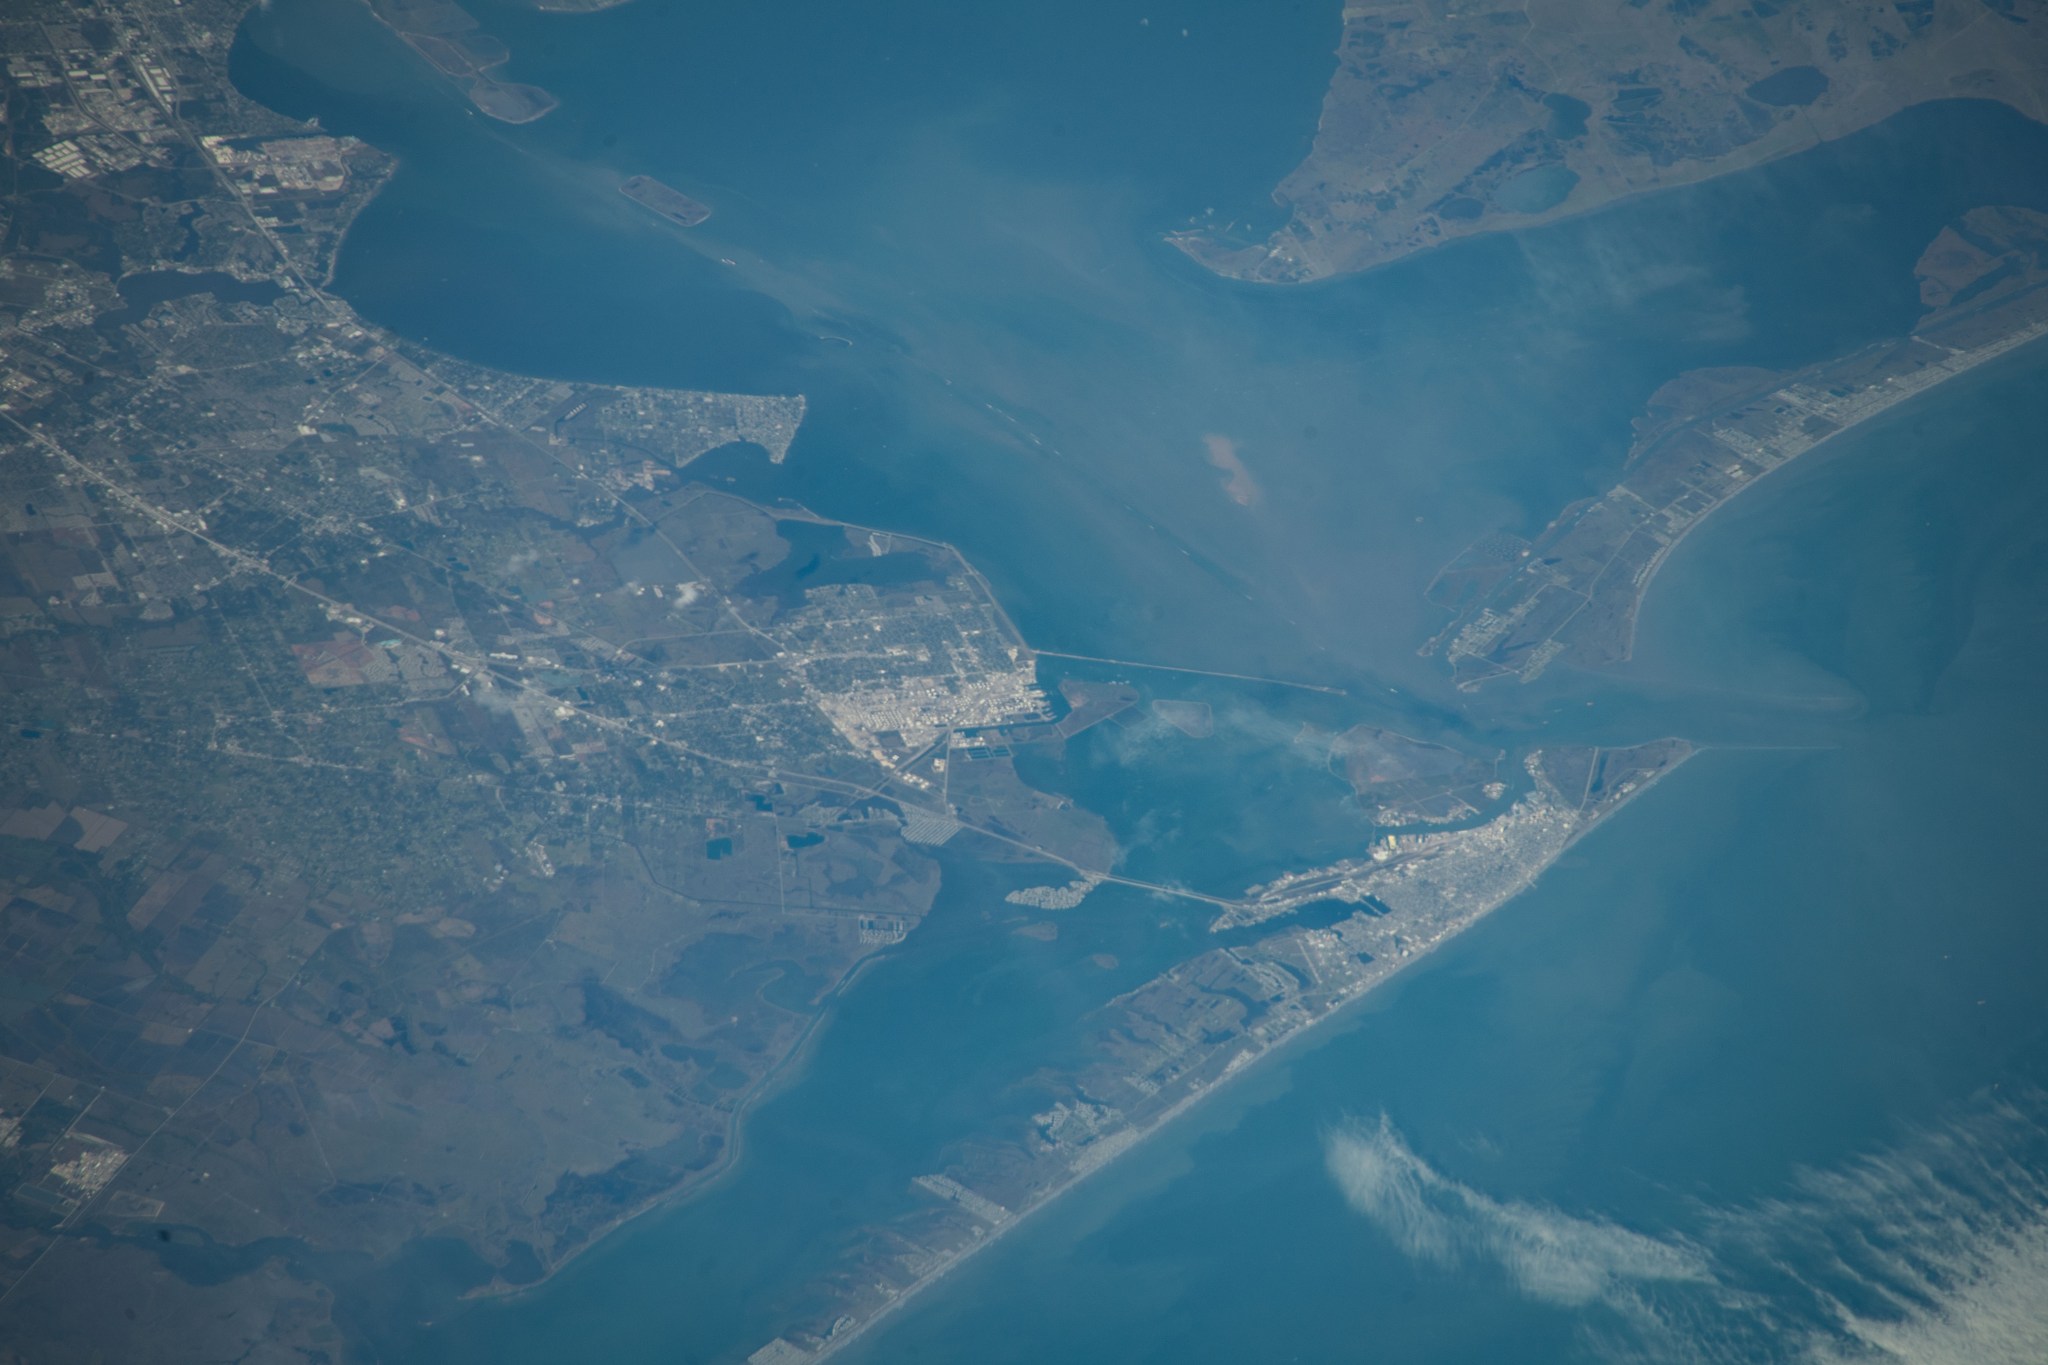 A view of Galveston from the International Space Station. The colors are faded: the land is a muted green, while the water is a hazy blue.